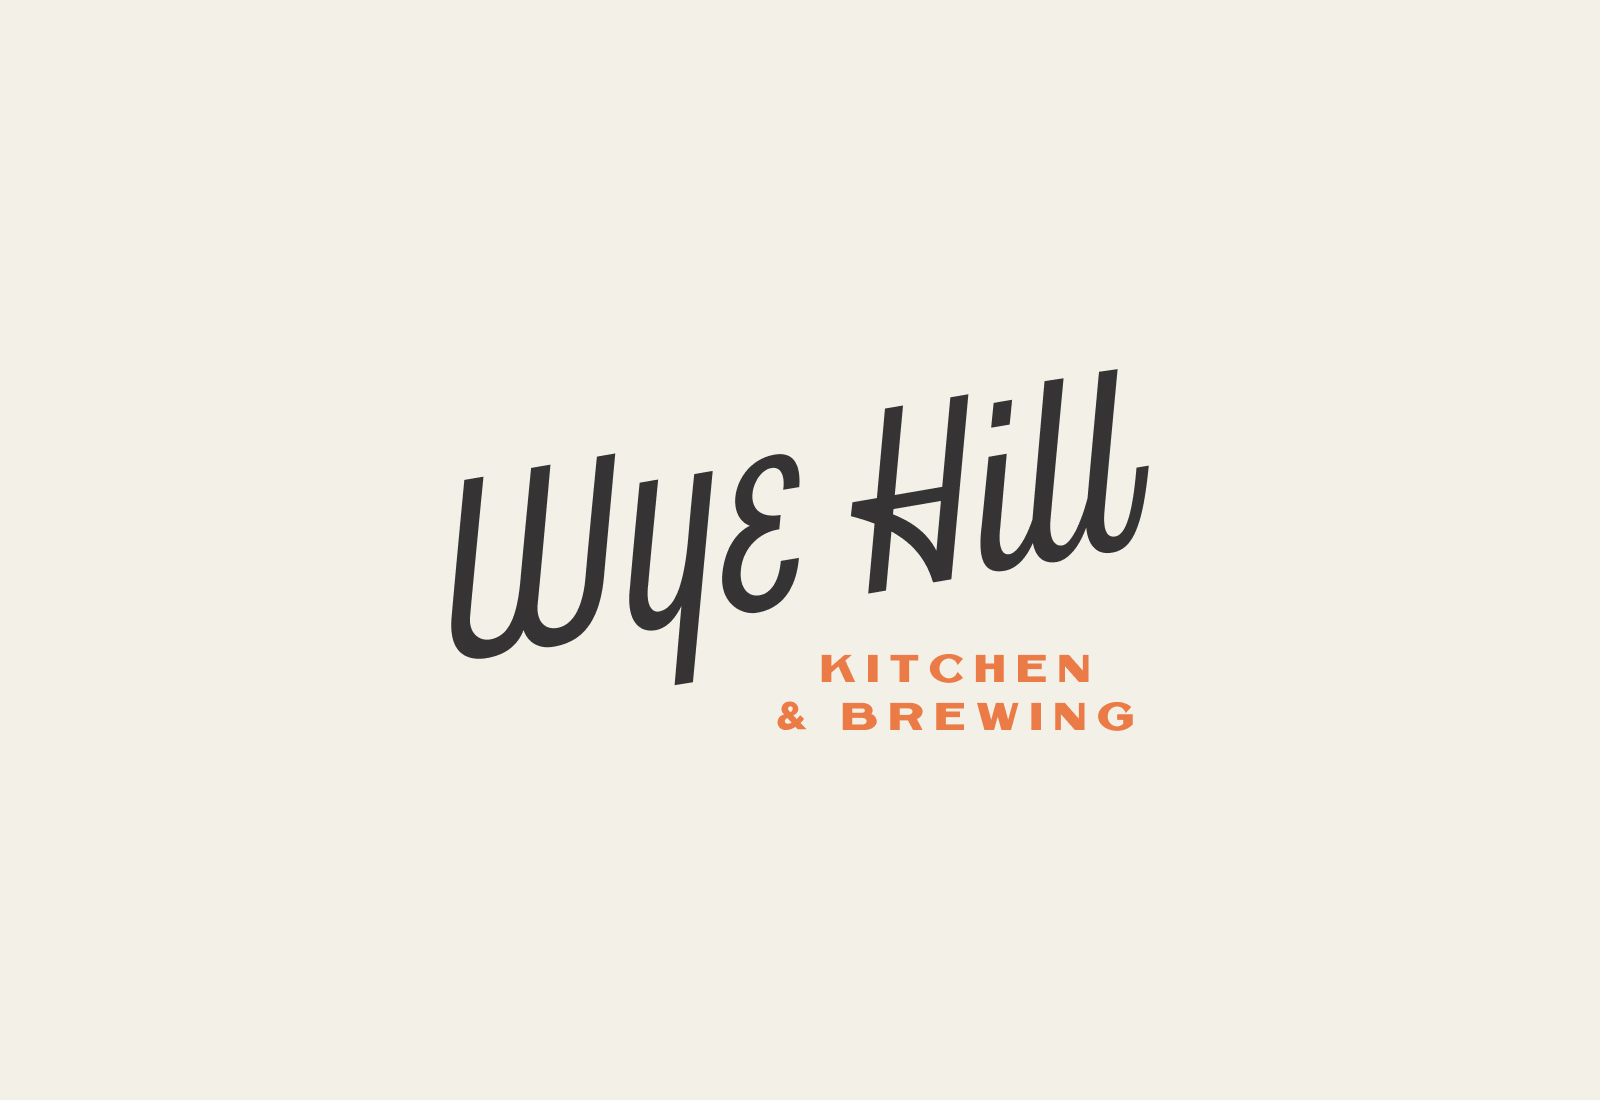 Primary Logo | Brand Identity for Wye Hill Kitchen and Brewing in Raleigh, NC